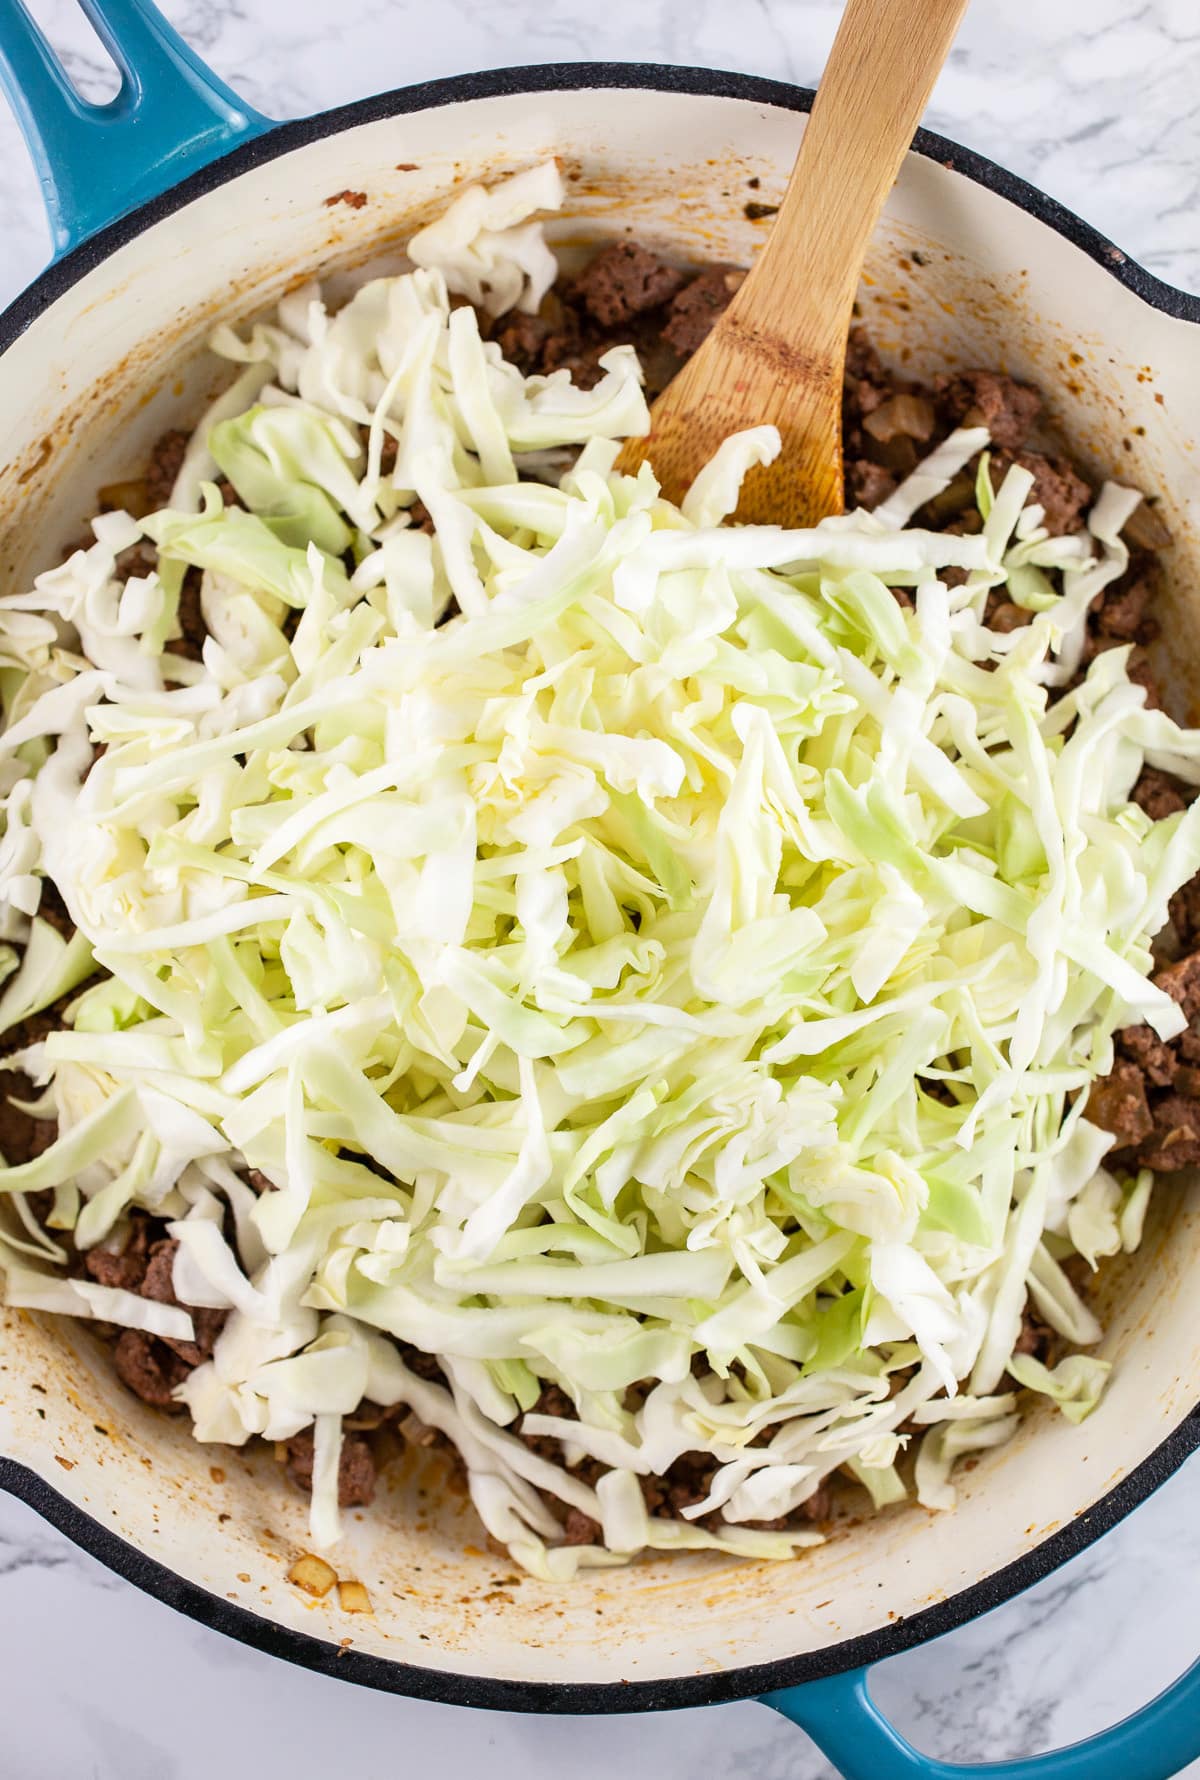 Shredded cabbage added to cooked ground beef mixture in skillet.